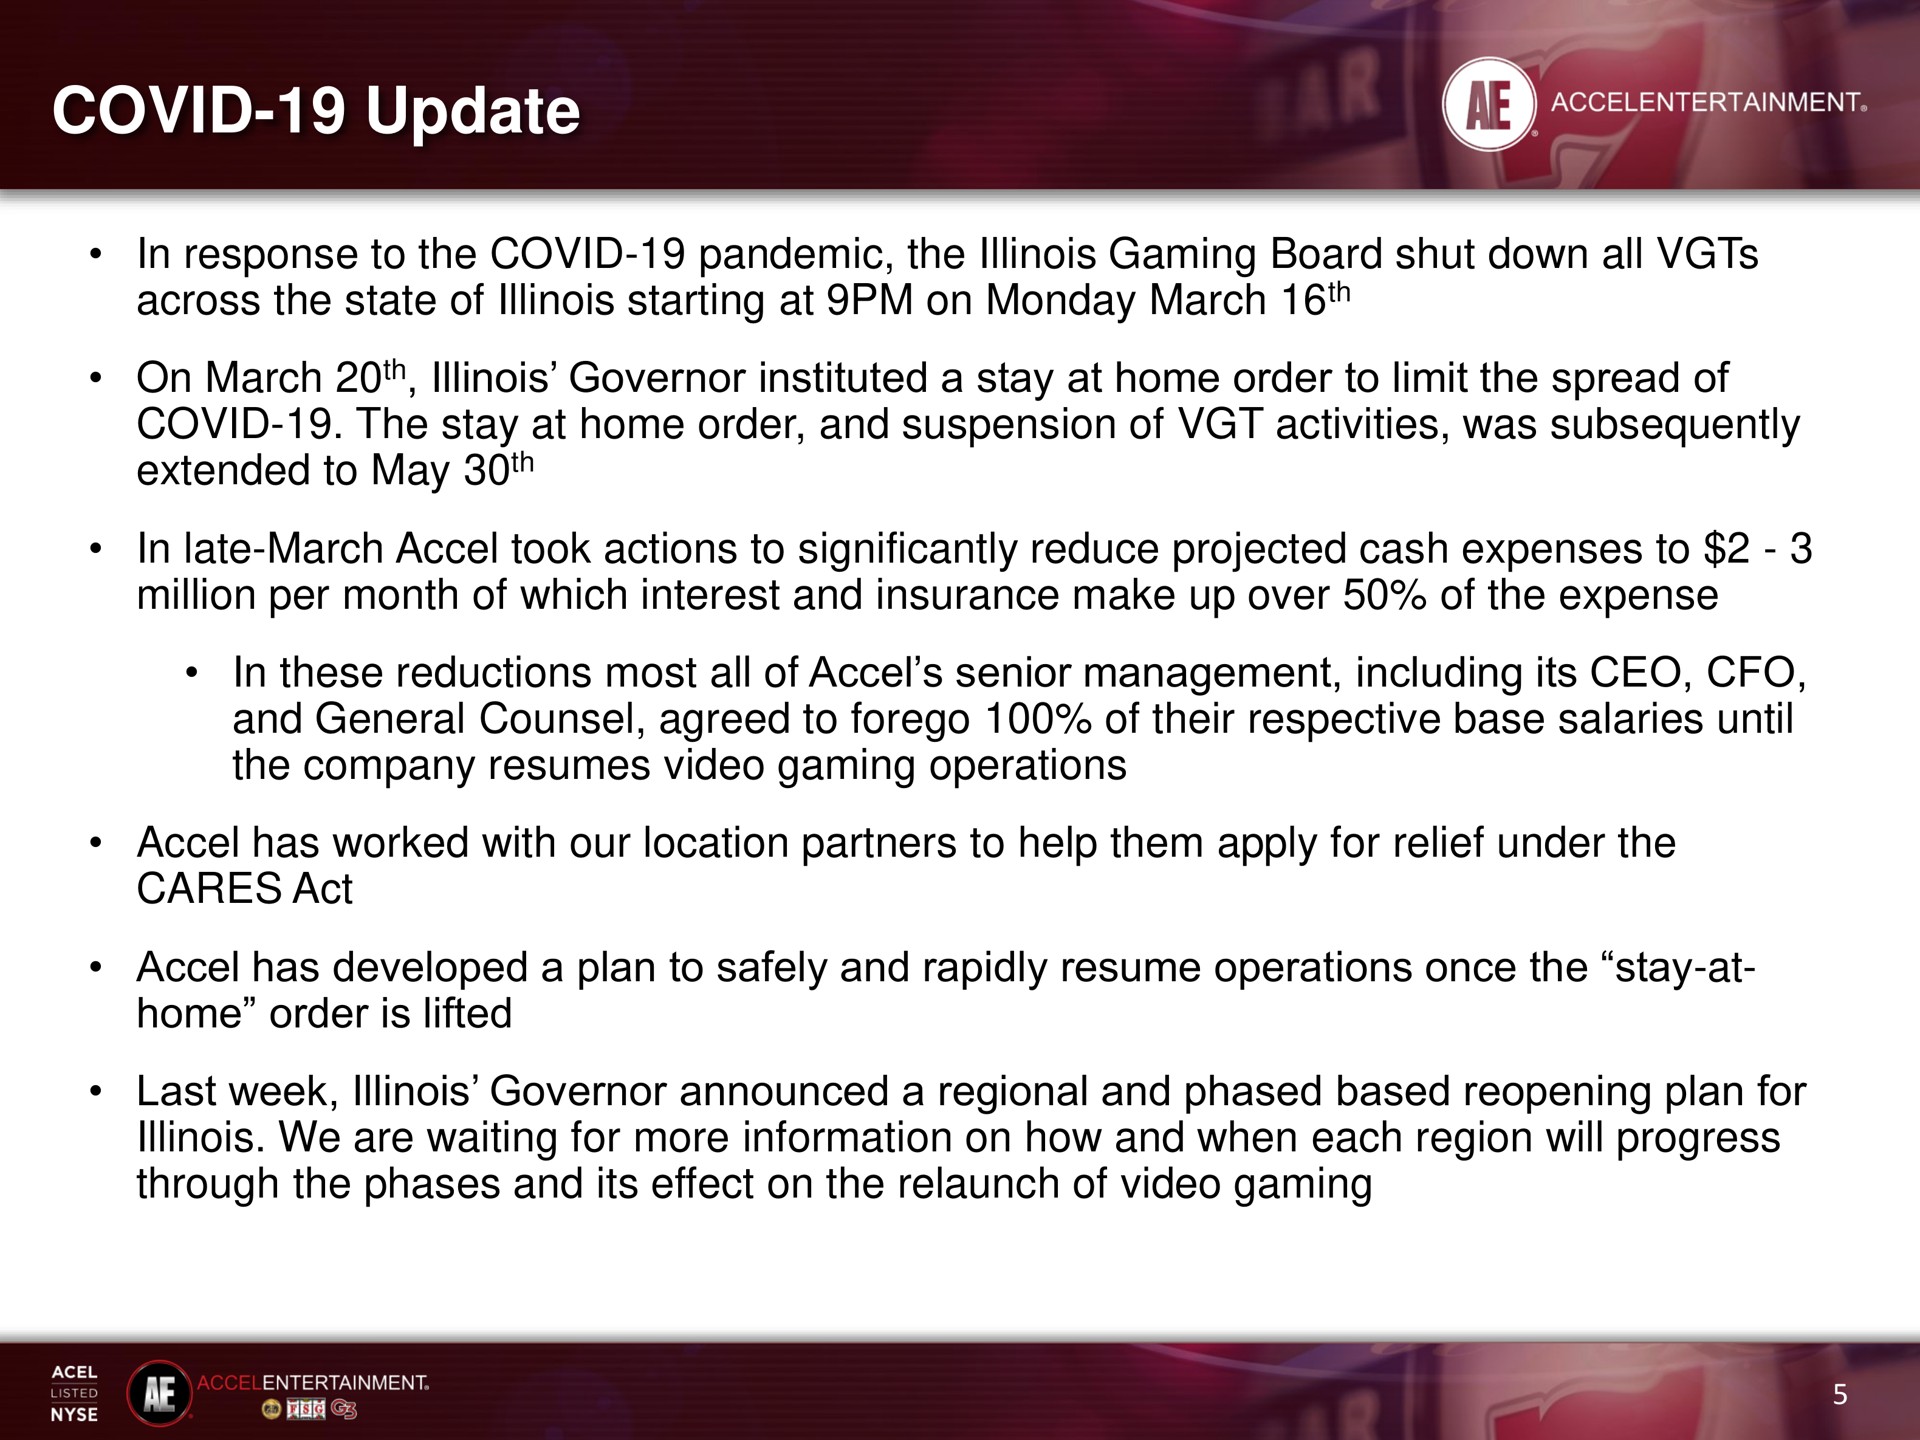 covid update in response to the covid pandemic the gaming board shut down all across the state of starting at on march on march governor instituted a stay at home order to limit the spread of covid the stay at home order and suspension of activities was subsequently extended to may in late march took actions to significantly reduce projected cash expenses to million per month of which interest and insurance make up over of the expense in these reductions most all of senior management including its and general counsel agreed to forego of their respective base salaries until the company resumes video gaming operations has worked with our location partners to help them apply for relief under the cares act has developed a plan to safely and rapidly resume operations once the stay at home order is lifted last week governor announced a regional and phased based reopening plan for we are waiting for more information on how and when each region will progress through the phases and its effect on the relaunch of video gaming | Accel Entertaiment